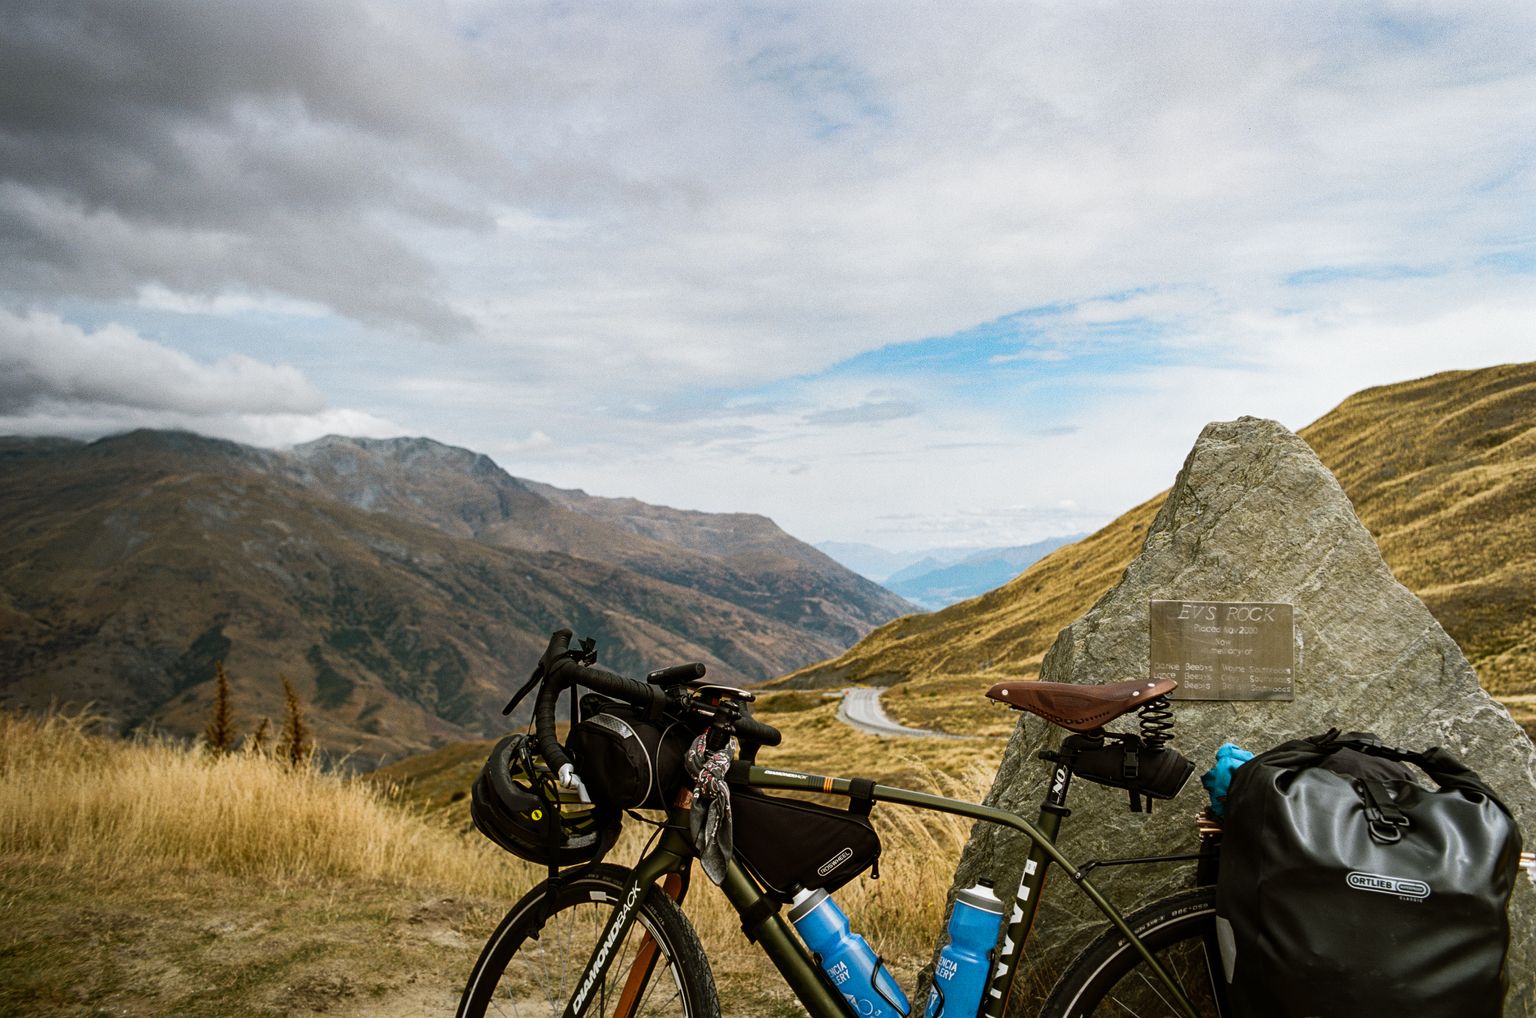 Loaded touring bike leaning against a rock overlooking a panoramic view of the New Zealand countryside with a road winding down the mountain in the distance.